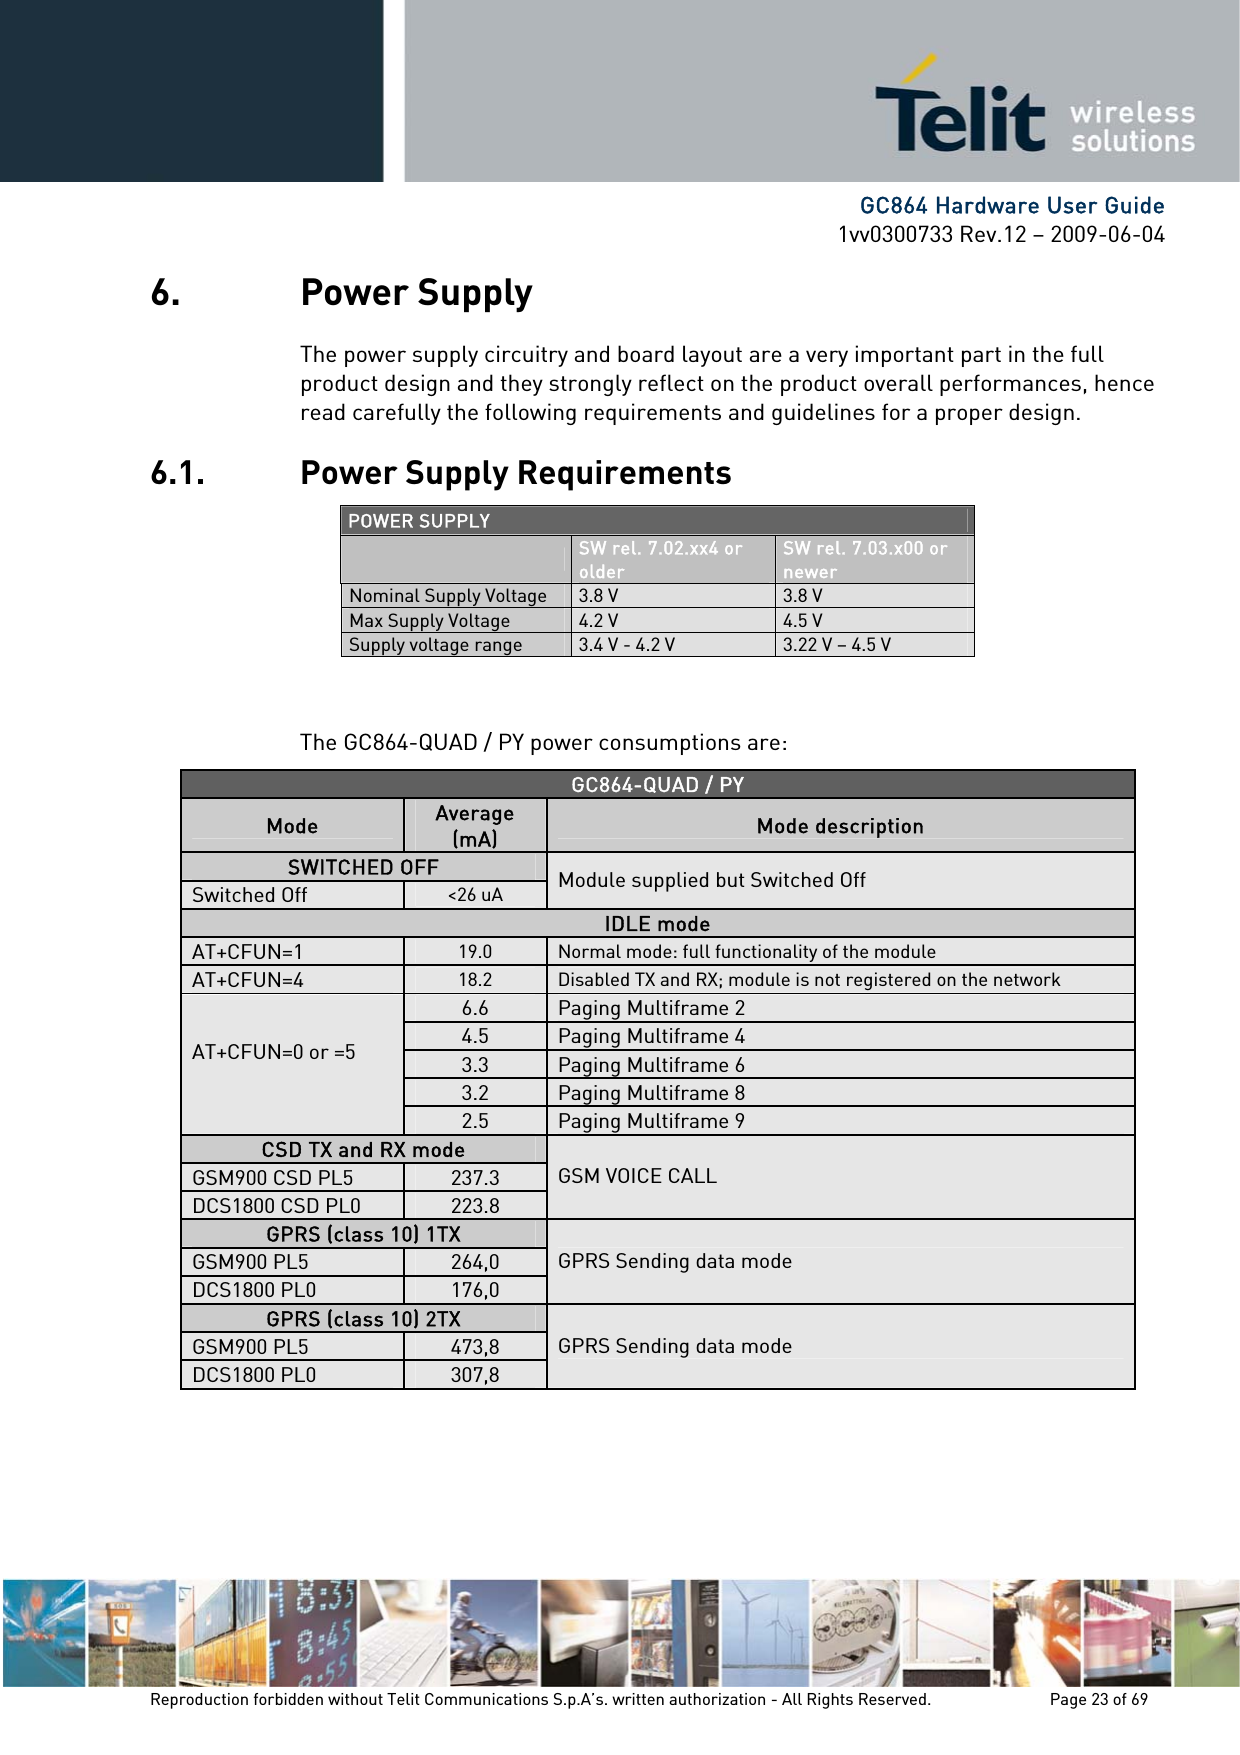      GC864 Hardware User Guide 1vv0300733 Rev.12 – 2009-06-04 6. Power Supply The power supply circuitry and board layout are a very important part in the full product design and they strongly reflect on the product overall performances, hence read carefully the following requirements and guidelines for a proper design. 6.1. Power Supply Requirements POWER SUPPLY  SW rel. 7.02.xx4 or older SW rel. 7.03.x00 or newer Nominal Supply Voltage 3.8 V  3.8 V Max Supply Voltage 4.2 V  4.5 V Supply voltage range 3.4 V - 4.2 V  3.22 V – 4.5 V   The GC864-QUAD / PY power consumptions are:  GC864-QUAD / PY Mode Average (mA) Mode description SWITCHED OFF Switched Off &lt;26 uA Module supplied but Switched Off IDLE mode AT+CFUN=1 19.0 Normal mode: full functionality of the module AT+CFUN=4 18.2 Disabled TX and RX; module is not registered on the network 6.6 Paging Multiframe 2 4.5 Paging Multiframe 4 3.3 Paging Multiframe 6 3.2 Paging Multiframe 8 AT+CFUN=0 or =5  2.5 Paging Multiframe 9 CSD TX and RX mode GSM900 CSD PL5 237.3 DCS1800 CSD PL0 223.8 GSM VOICE CALL GPRS (class 10) 1TX GSM900 PL5 264,0 DCS1800 PL0 176,0 GPRS Sending data mode GPRS (class 10) 2TX GSM900 PL5 473,8 DCS1800 PL0 307,8 GPRS Sending data mode  Reproduction forbidden without Telit Communications S.p.A’s. written authorization - All Rights Reserved.    Page 23 of 69  